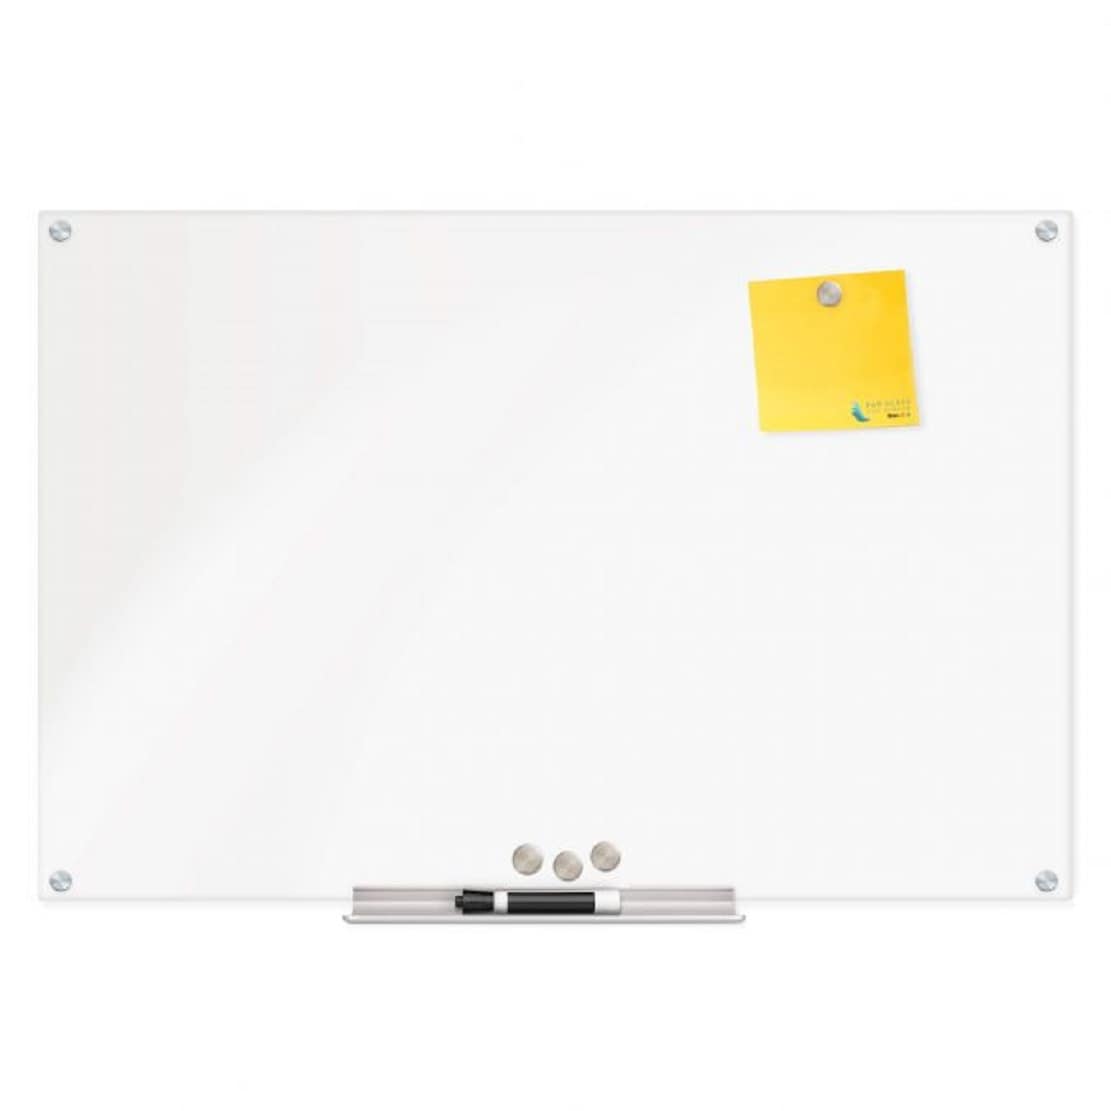 Self-Adhesive Magnetic Dry-Erase Whiteboard Wall Stickers 48x36